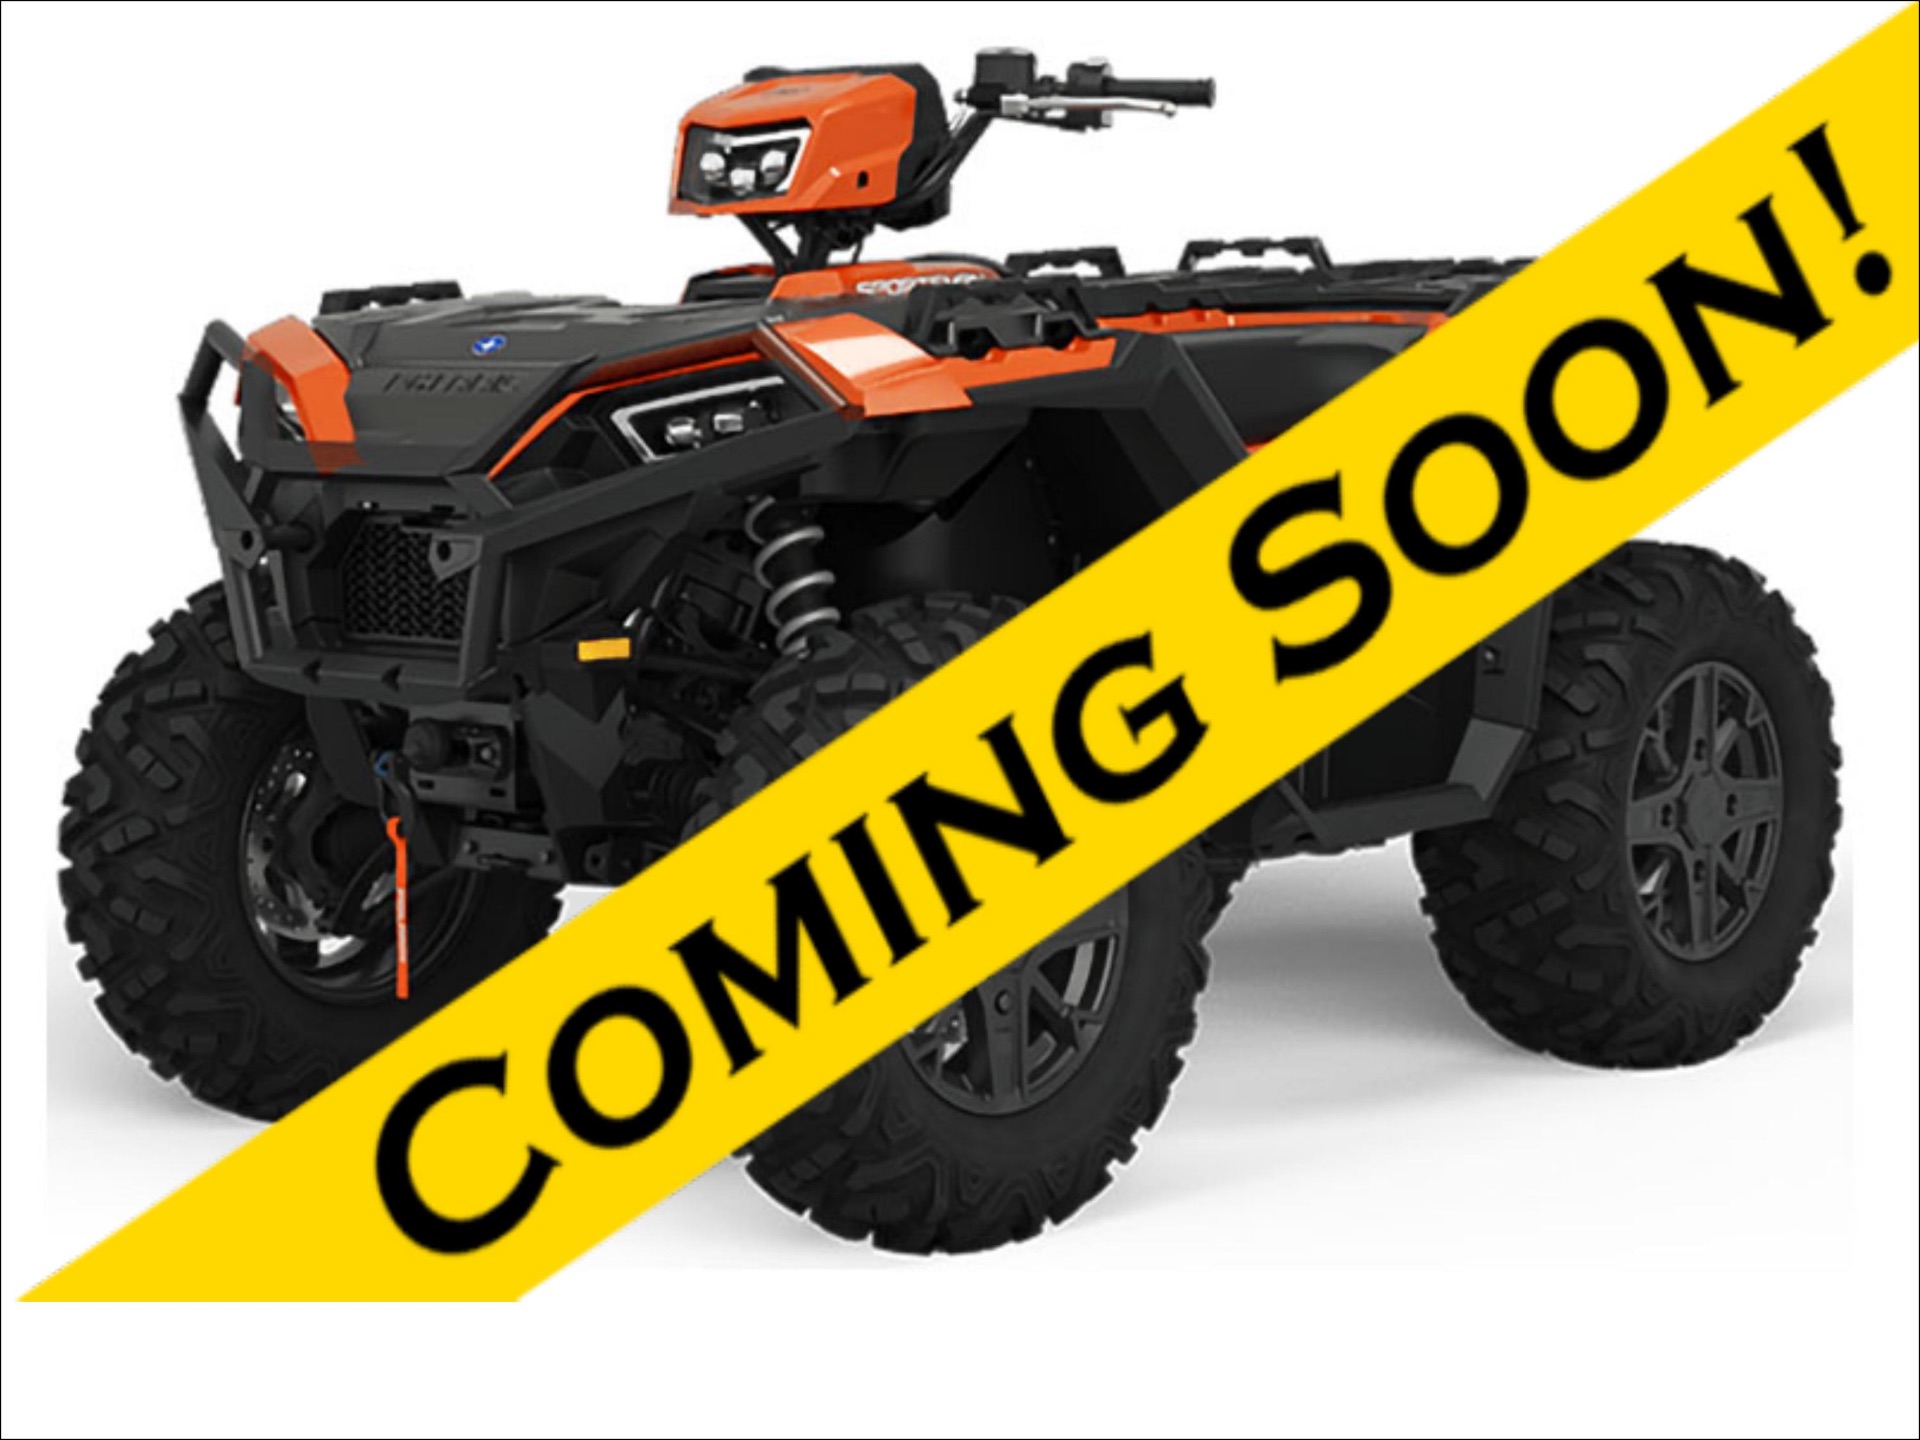 2022 Polaris Sportsman 850 Ultimate Trail in Mahwah, New Jersey - Photo 1